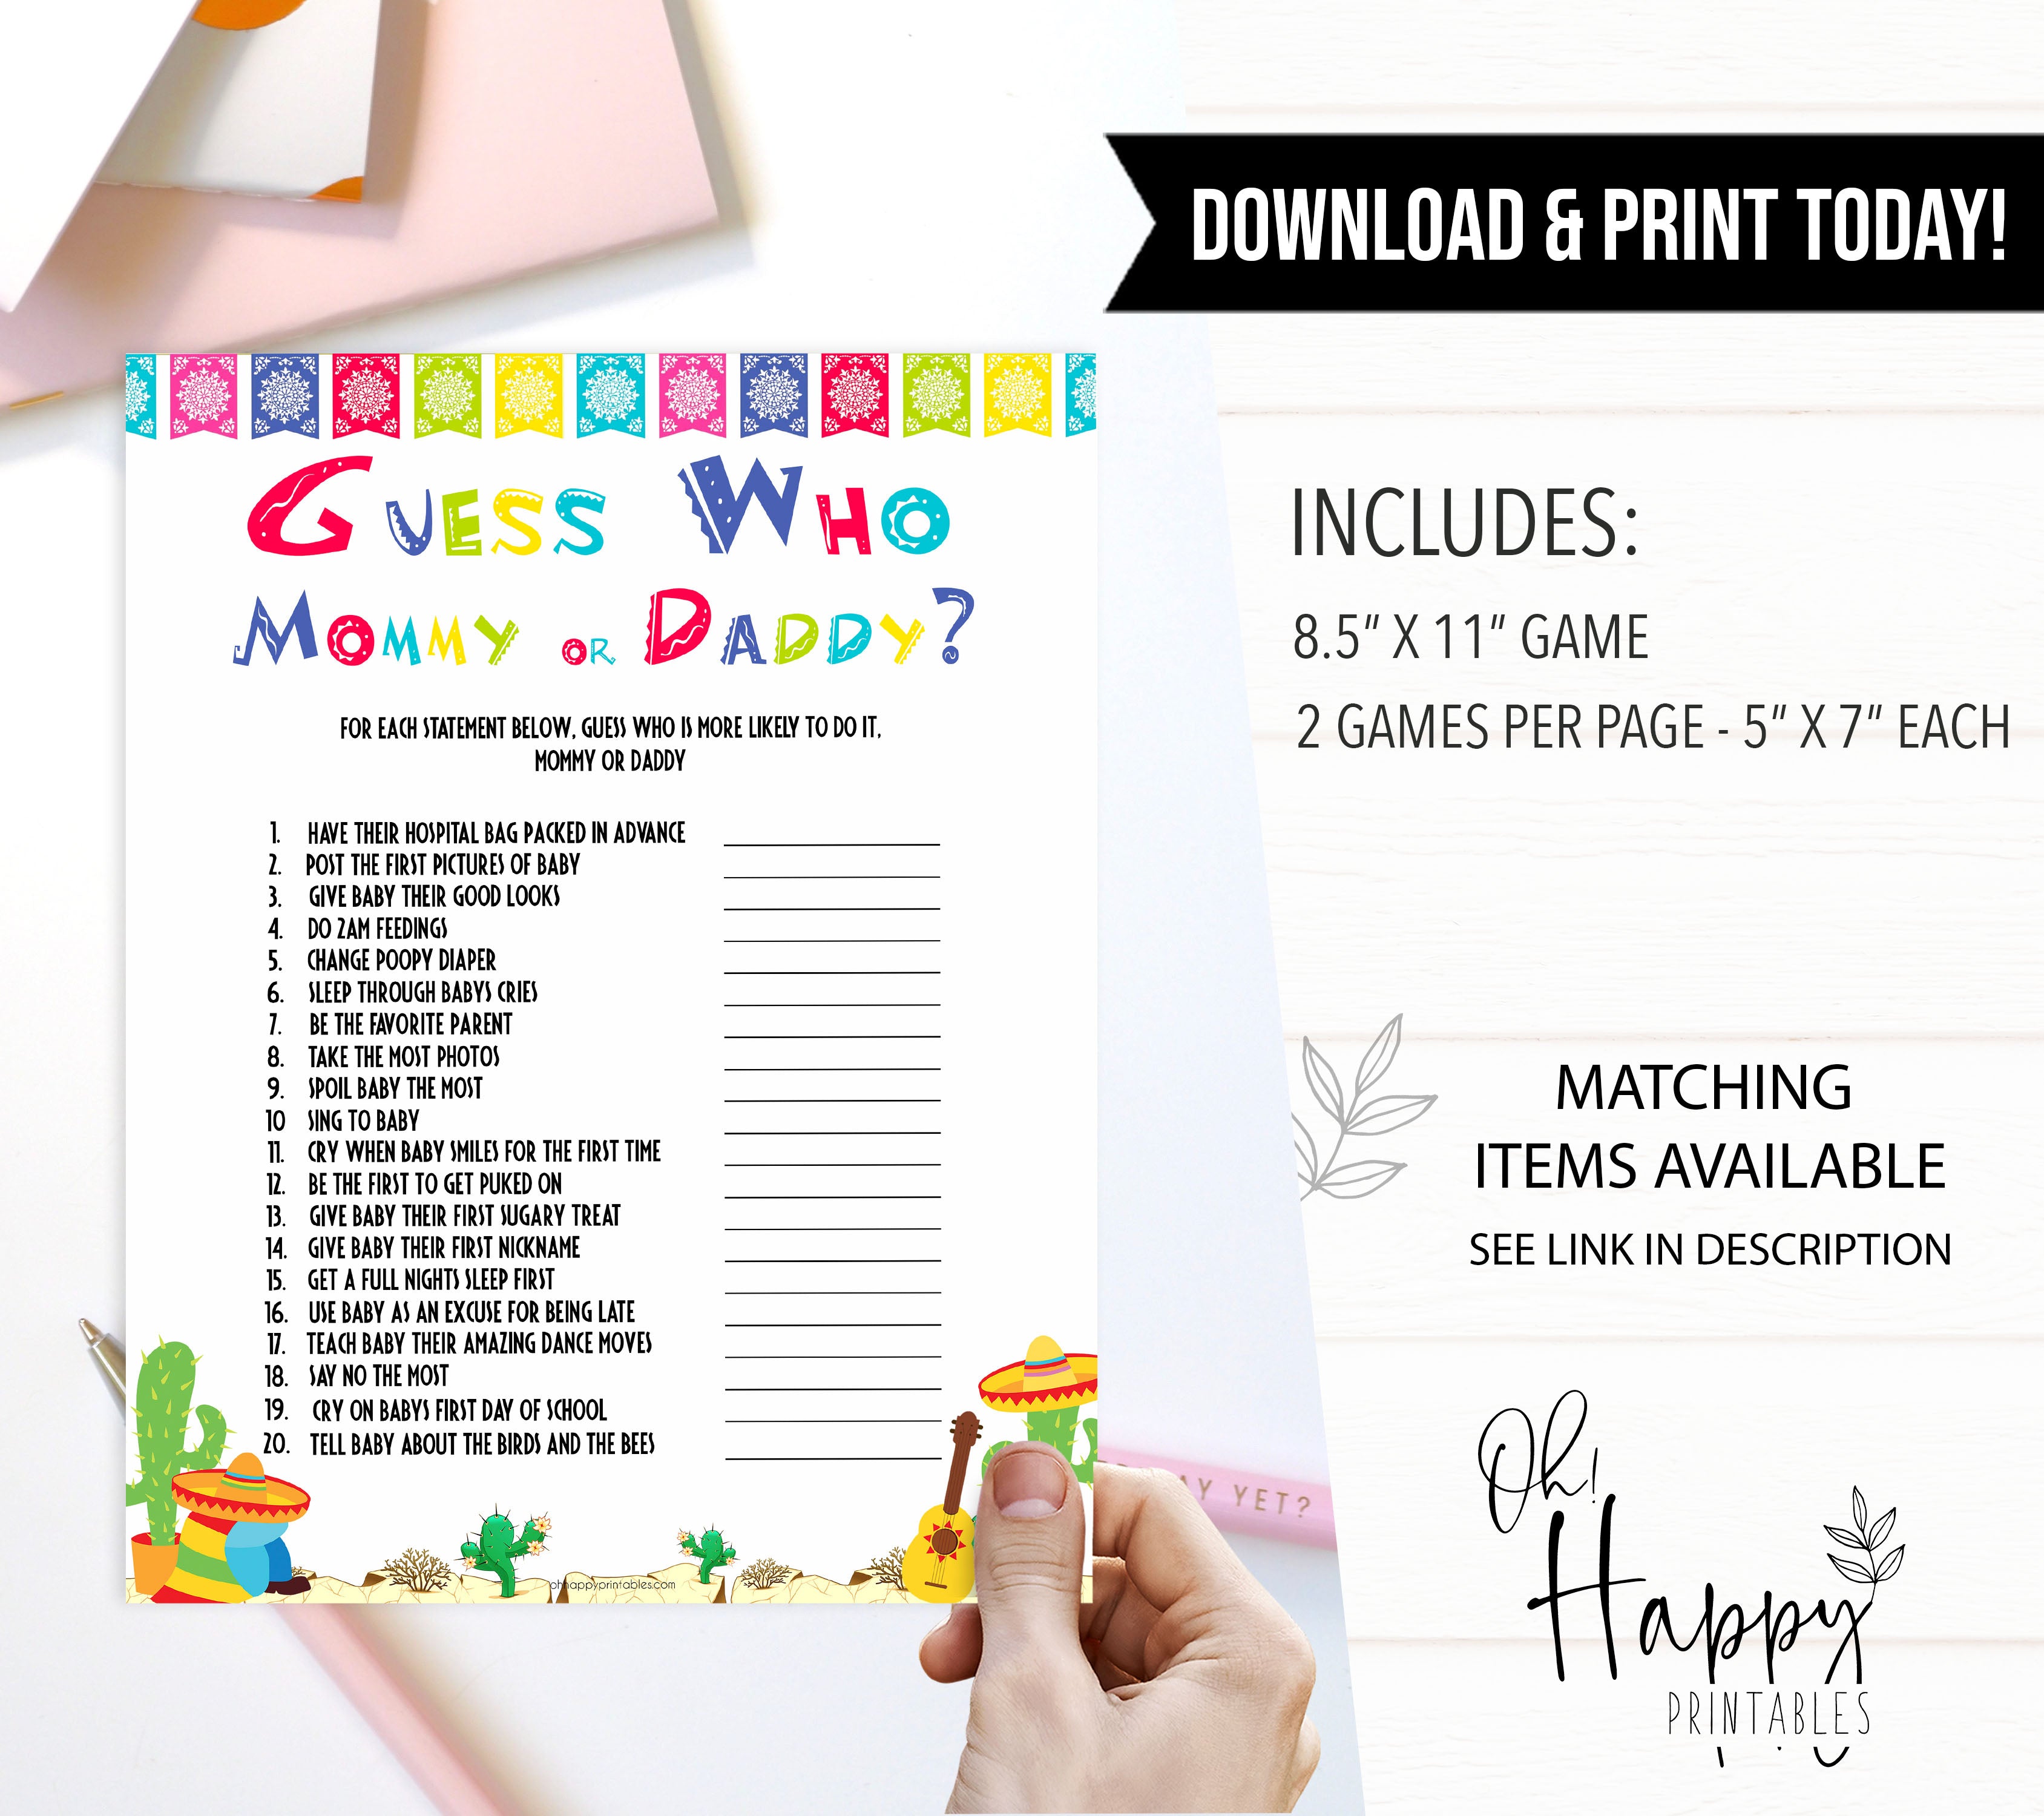 guess who mommy or daddy game, Printable baby shower games, Mexican fiesta fun baby games, baby shower games, fun baby shower ideas, top baby shower ideas, fiesta shower baby shower, fiesta baby shower ideas